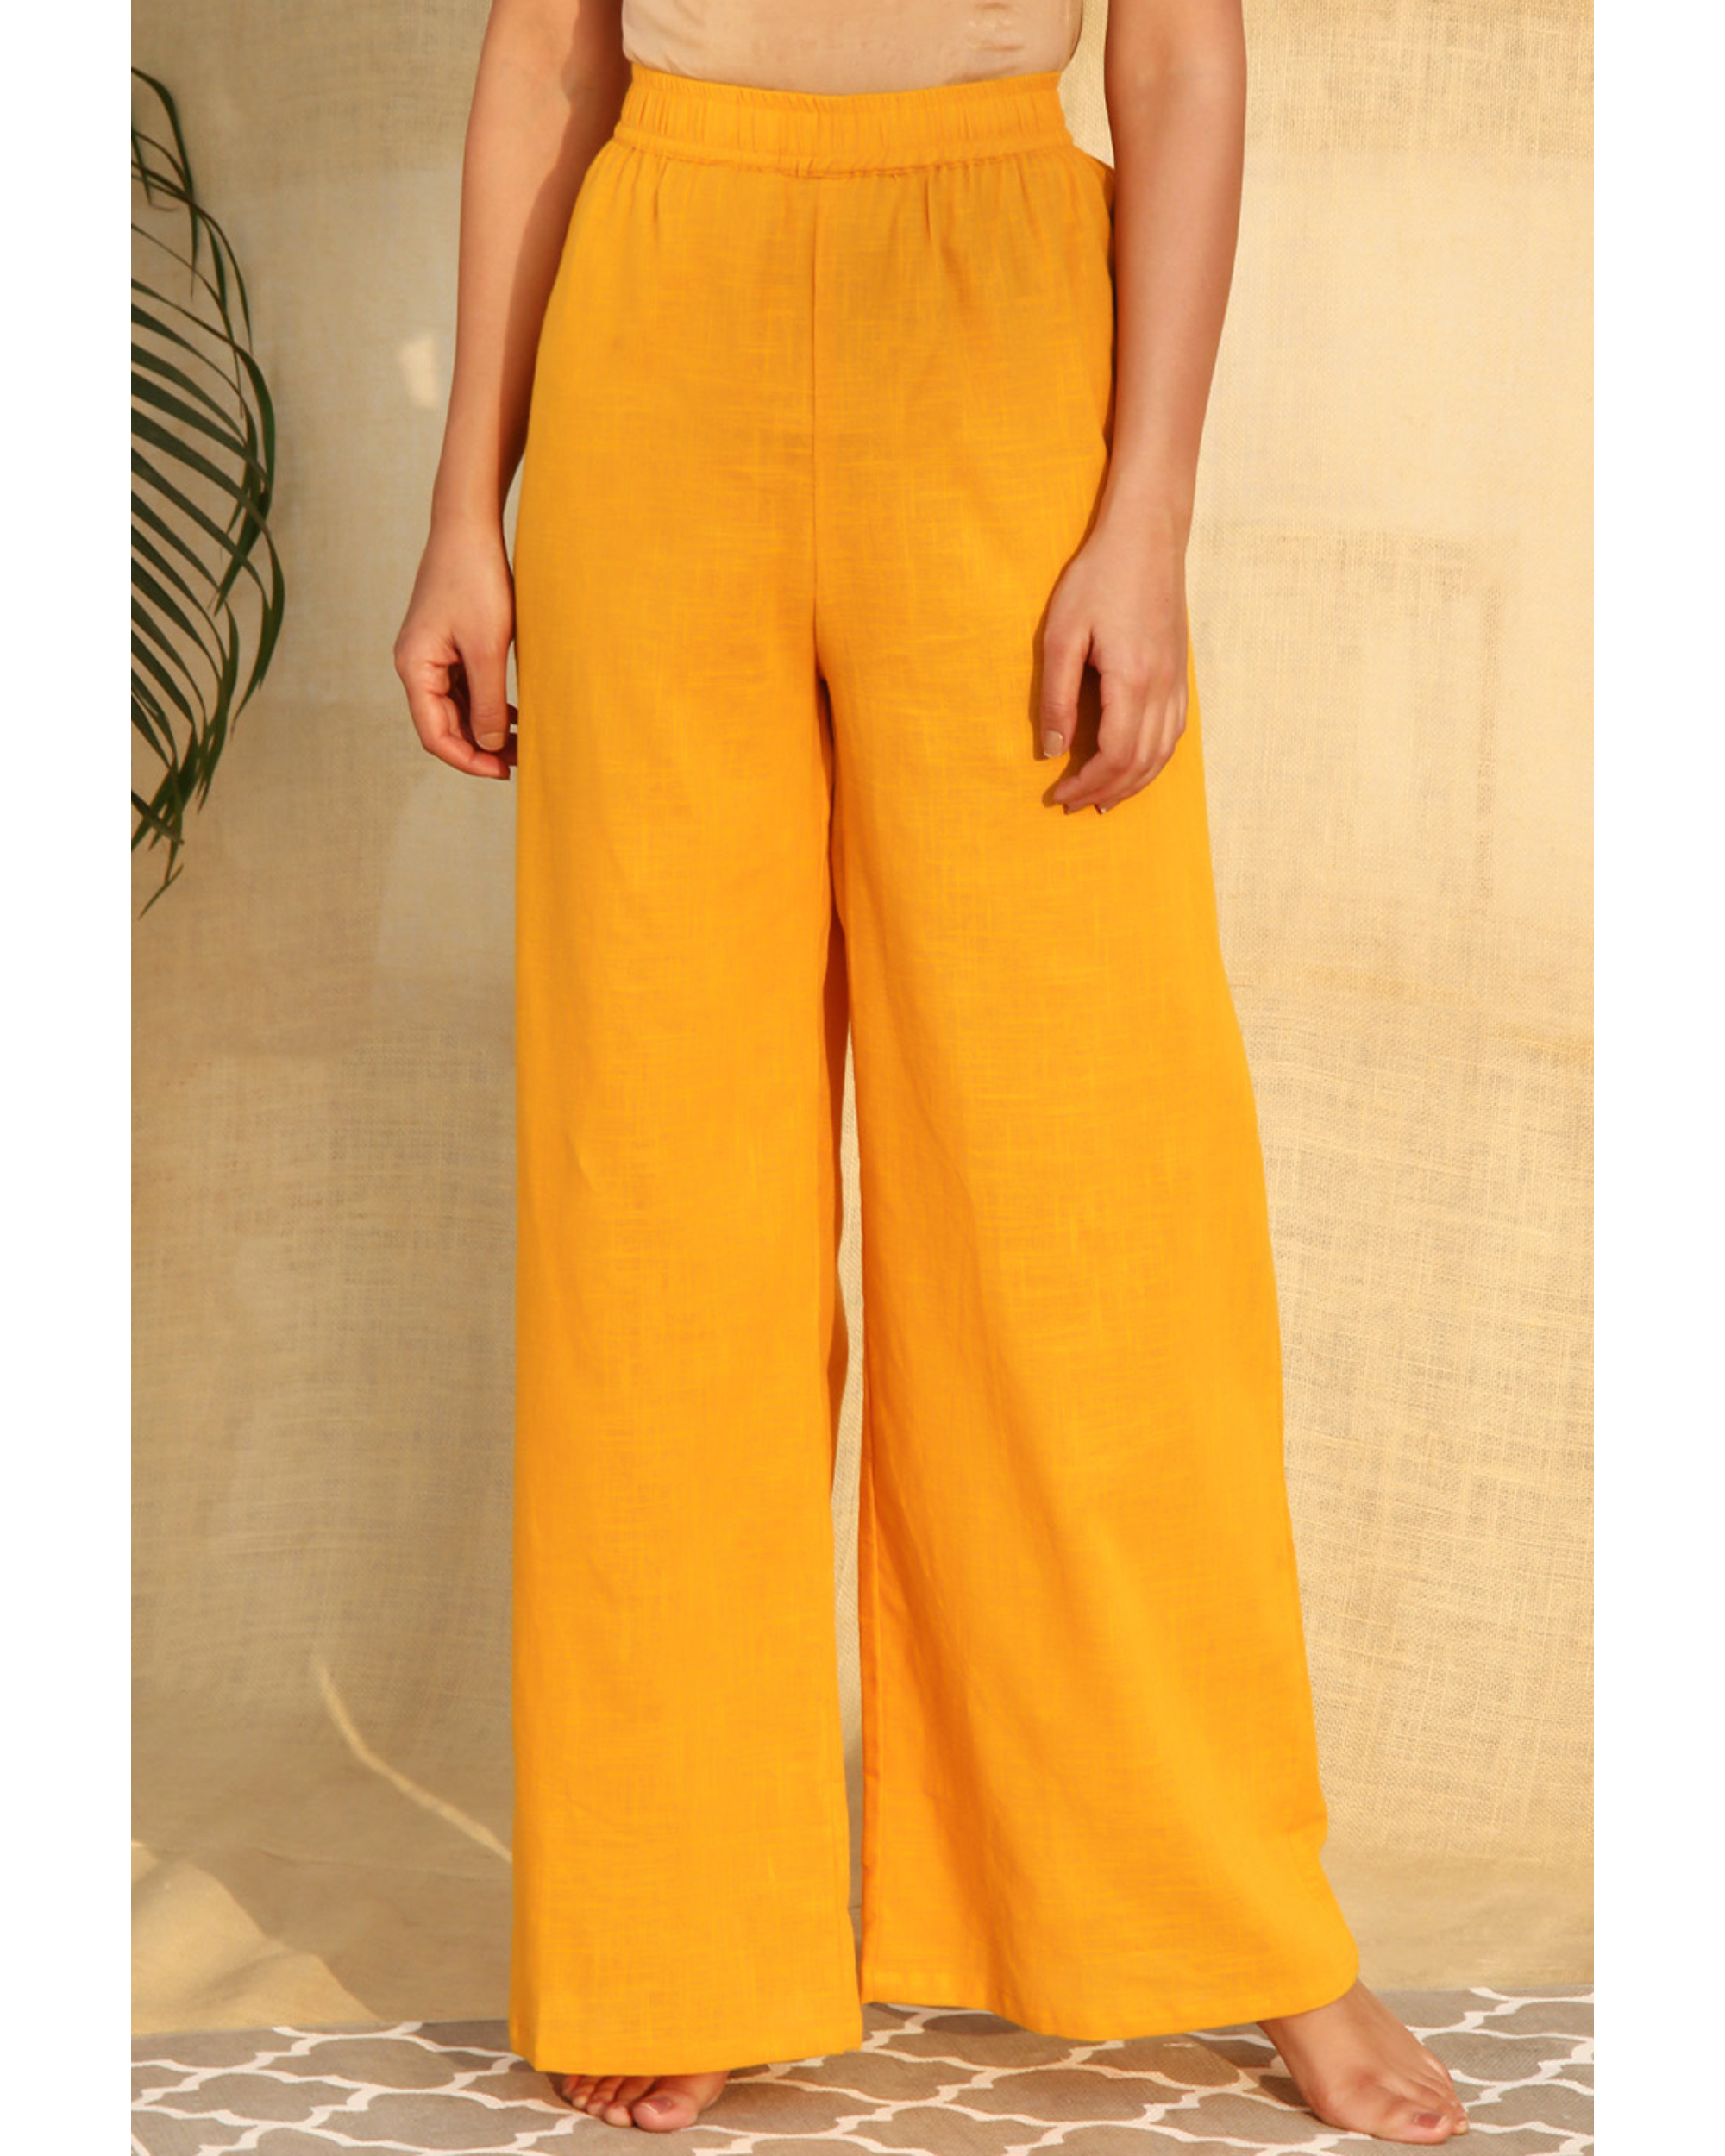 Buy ALAXENDER Casual Palazzo for Women Lounge Pants Wide Leg Trousers Women  Pants with Elastic Waistband Free Size (28 Till 36) Mustard at Amazon.in